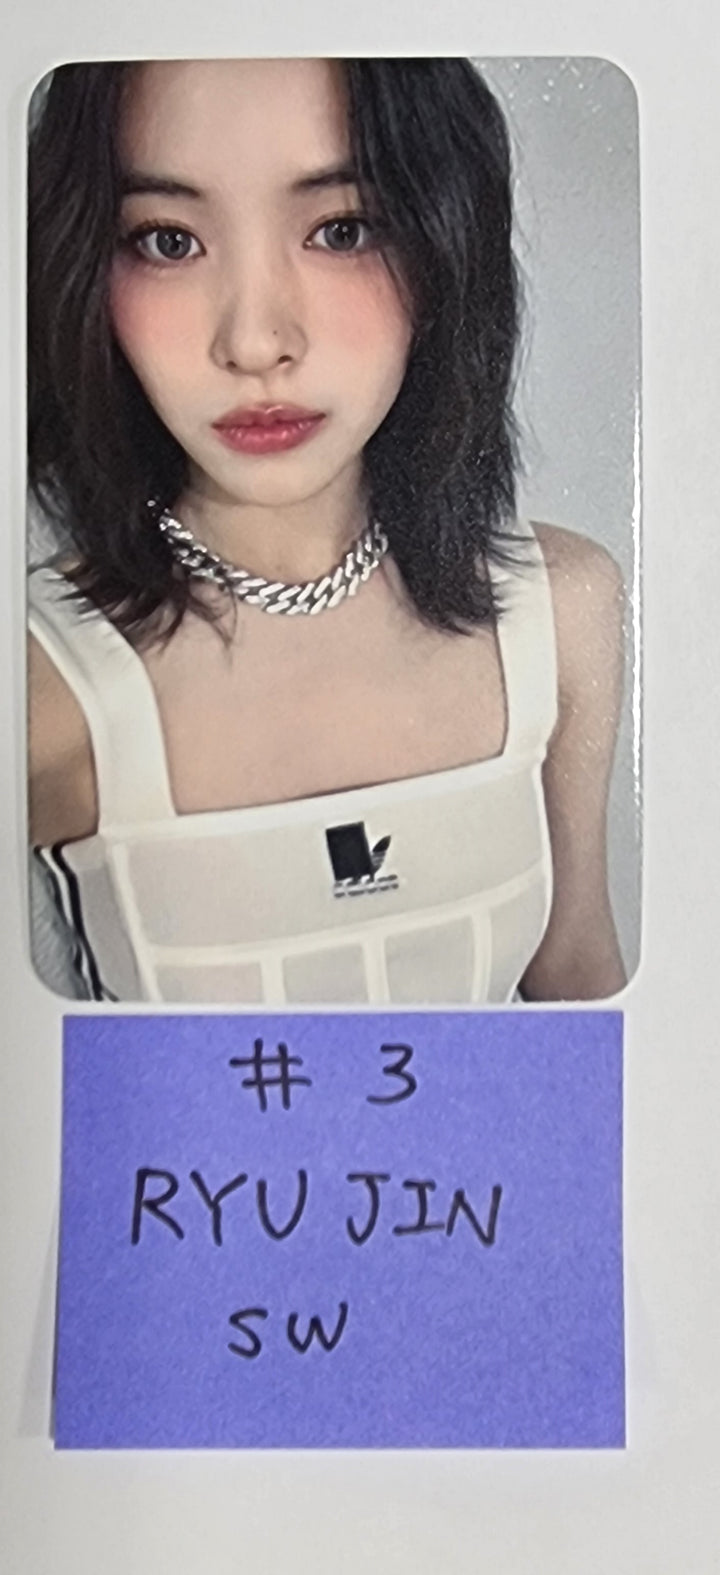 ITZY 'KILL MY DOUBT' - Soundwave Fansign Event Photocard Round 10 [23.09.08]